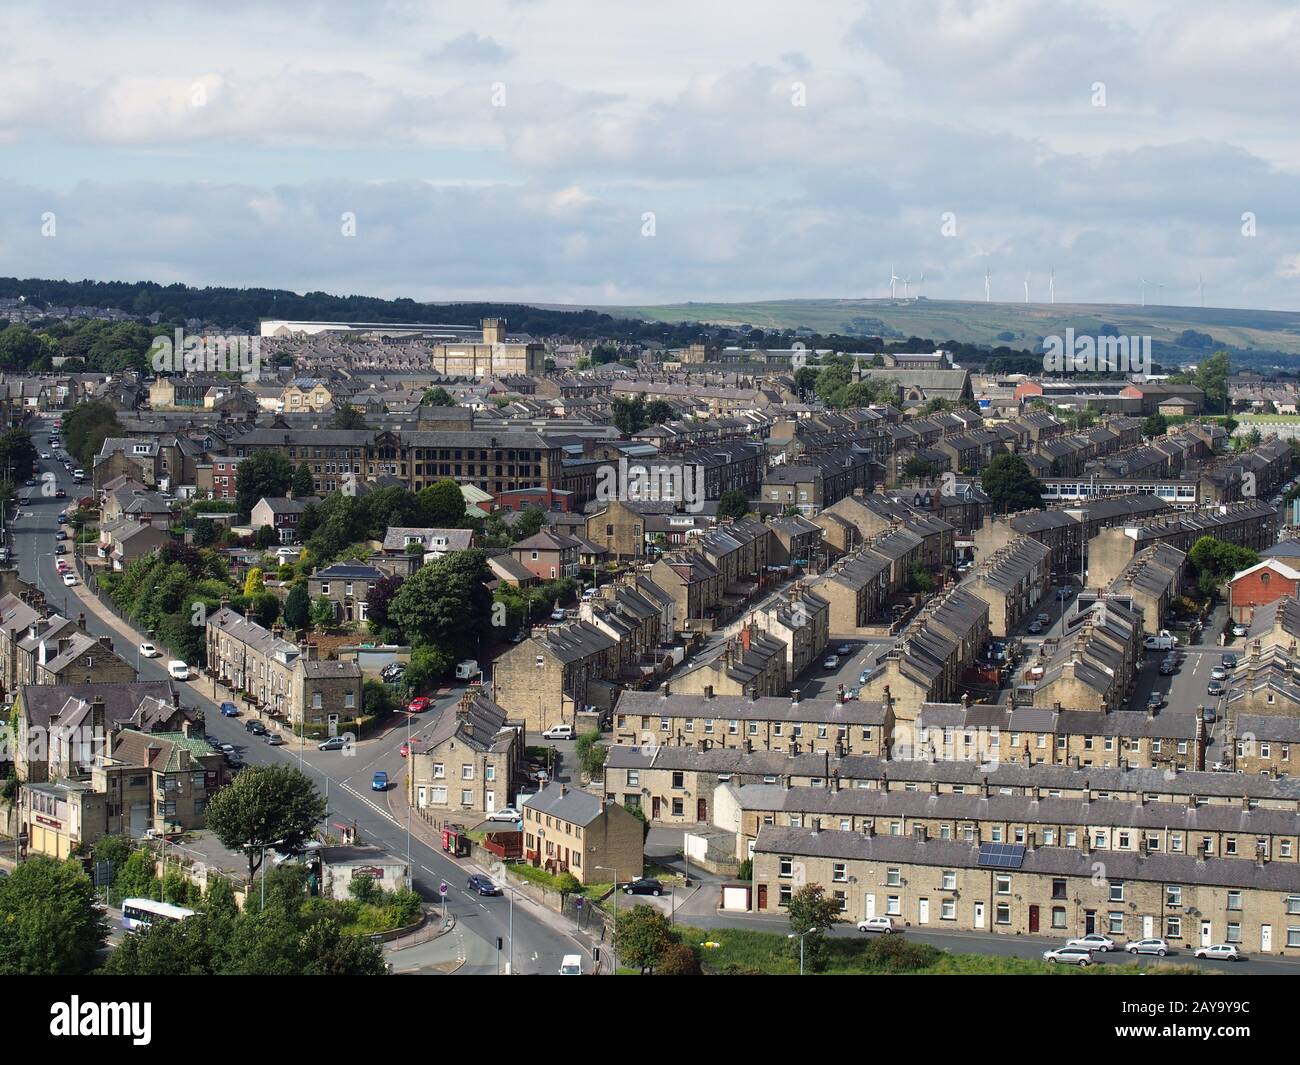 panoramic view of Halifax in west yorkshire with rows of terraced streets buildings and roads Stock Photo